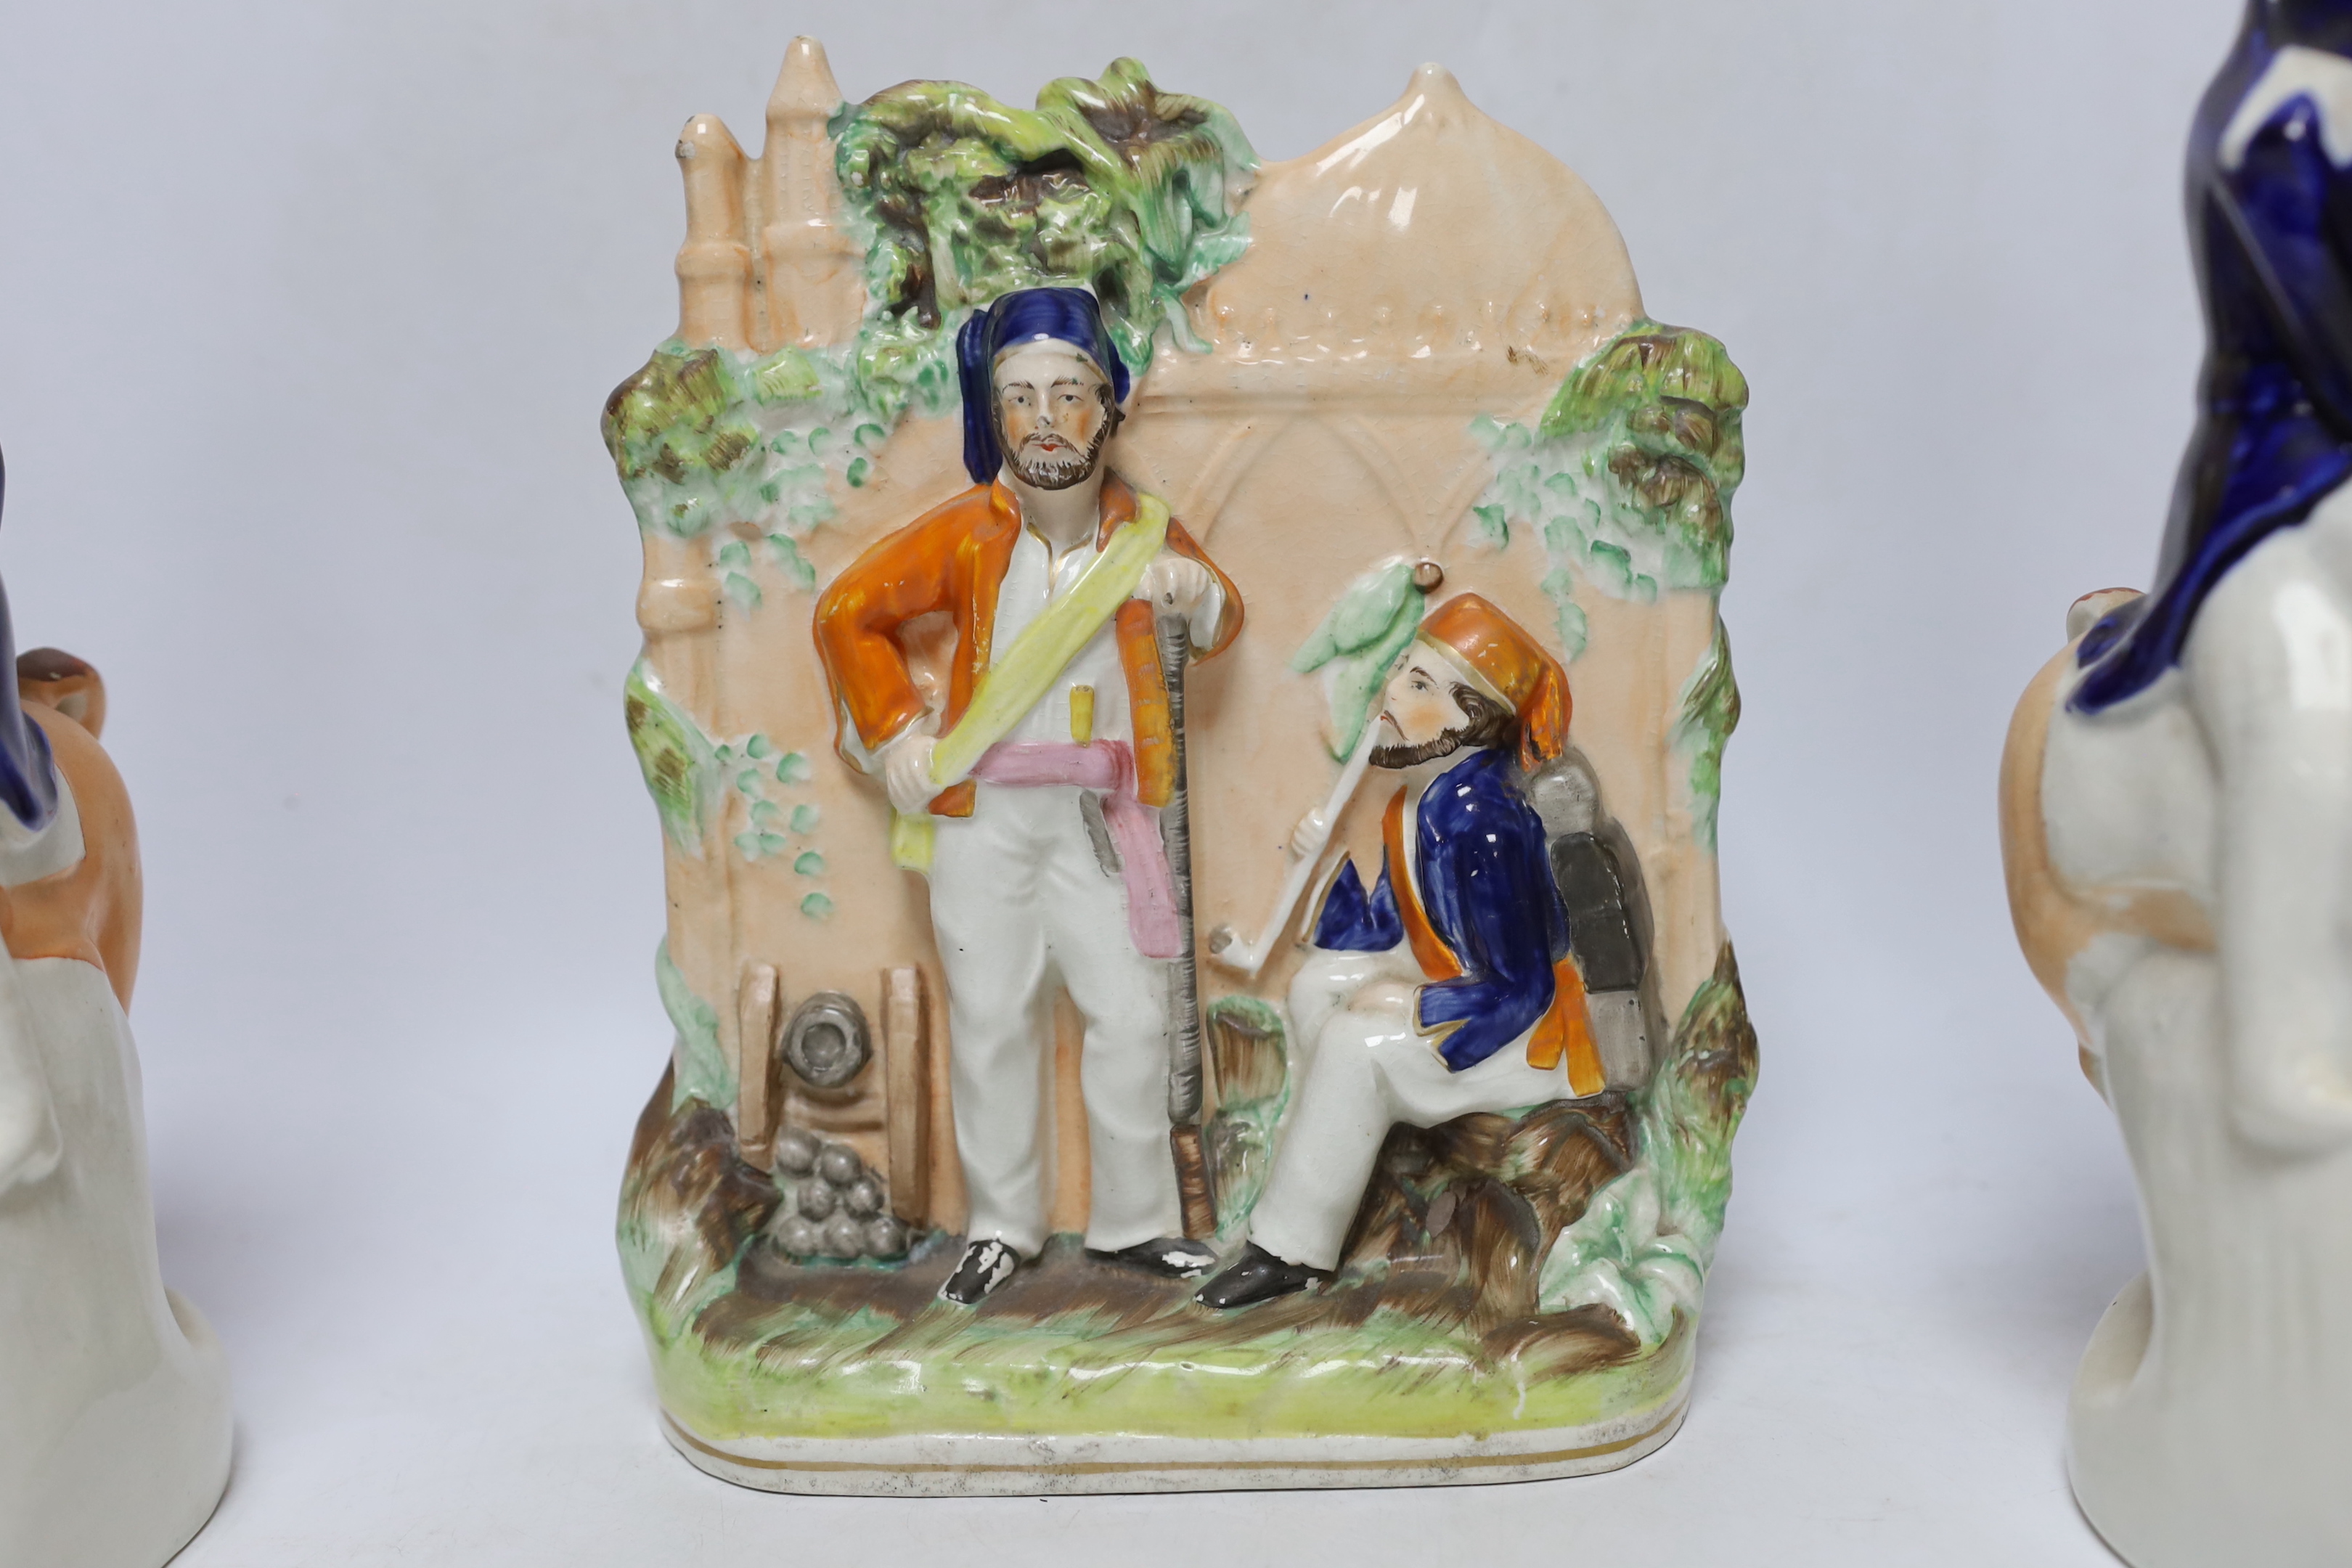 Three mid 19th century Staffordshire figure groups including Lord Raglan and Marshal Arnaud and Turkish soldiers, tallest 26.5cm